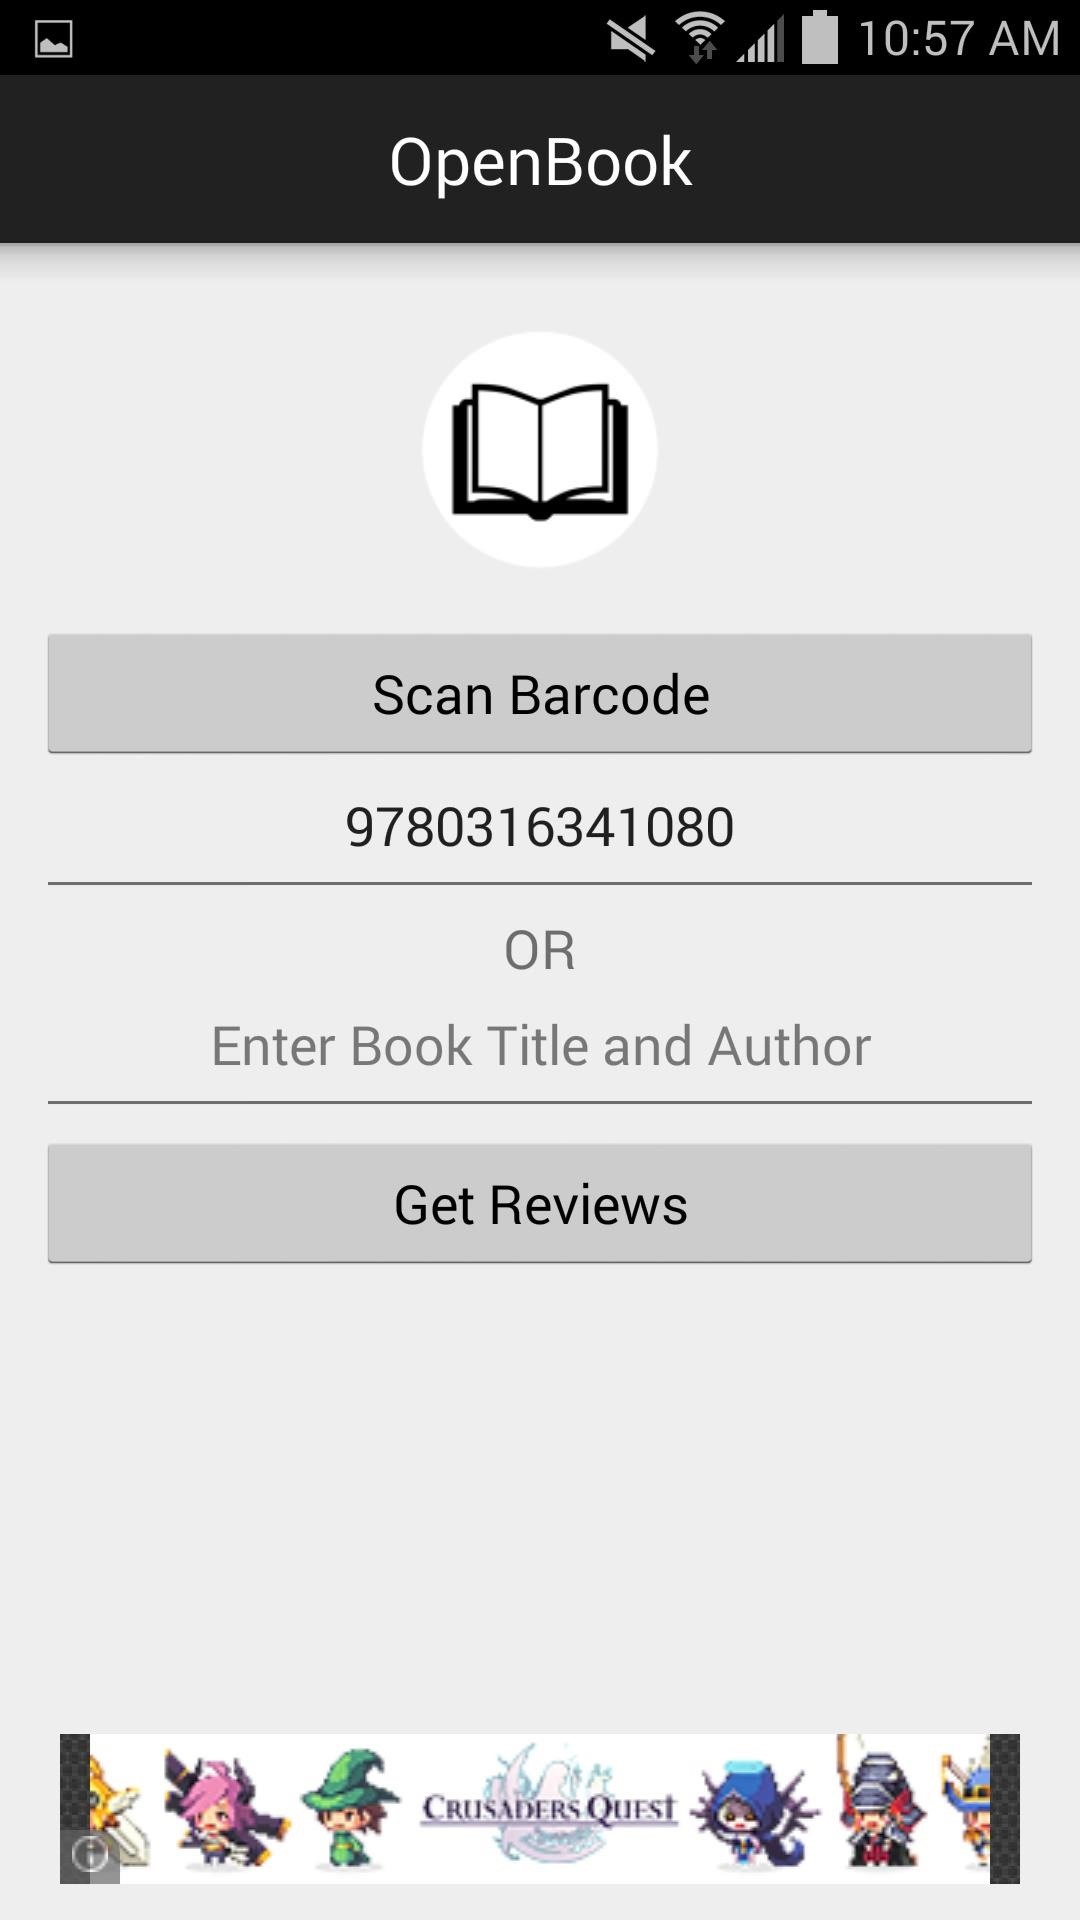 Scan Book Barcodes in Stores for Quick Access to Reviews on Android